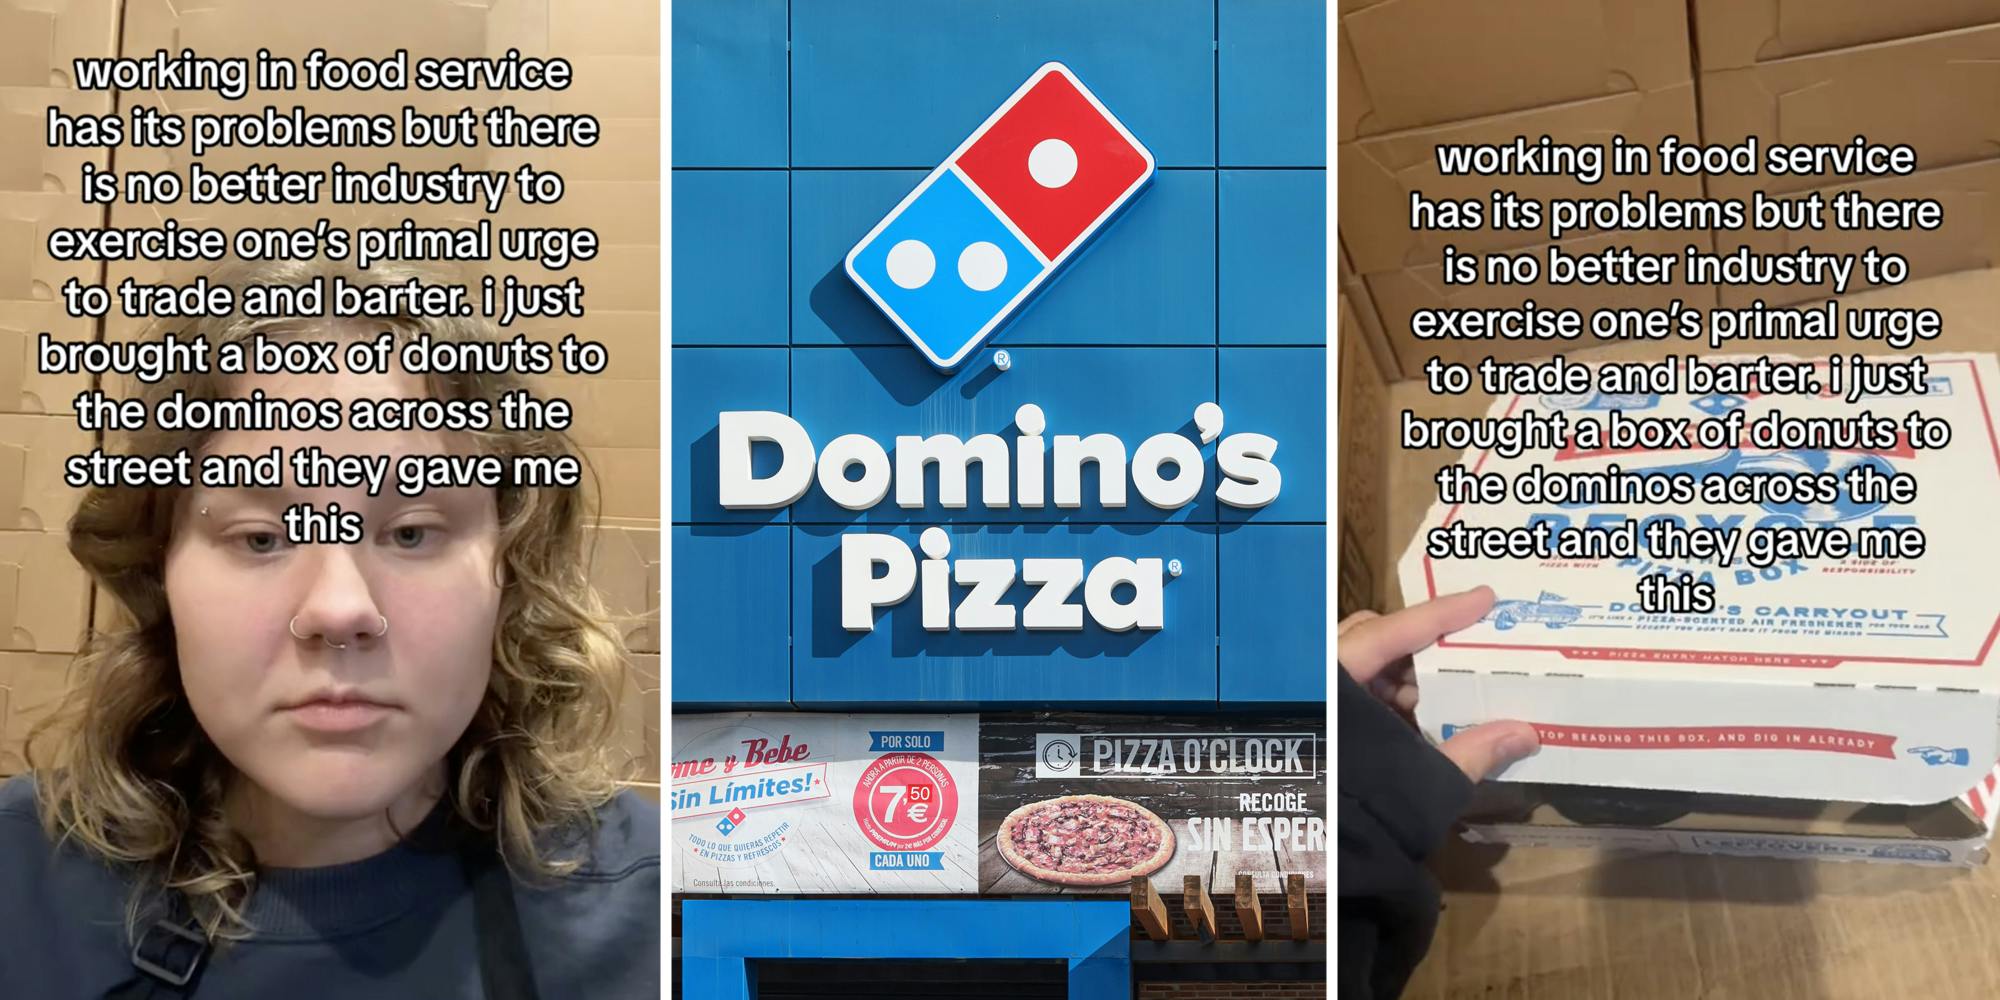 Person behind text(l), Dominos Pizza(c), Dominos box under text(r)